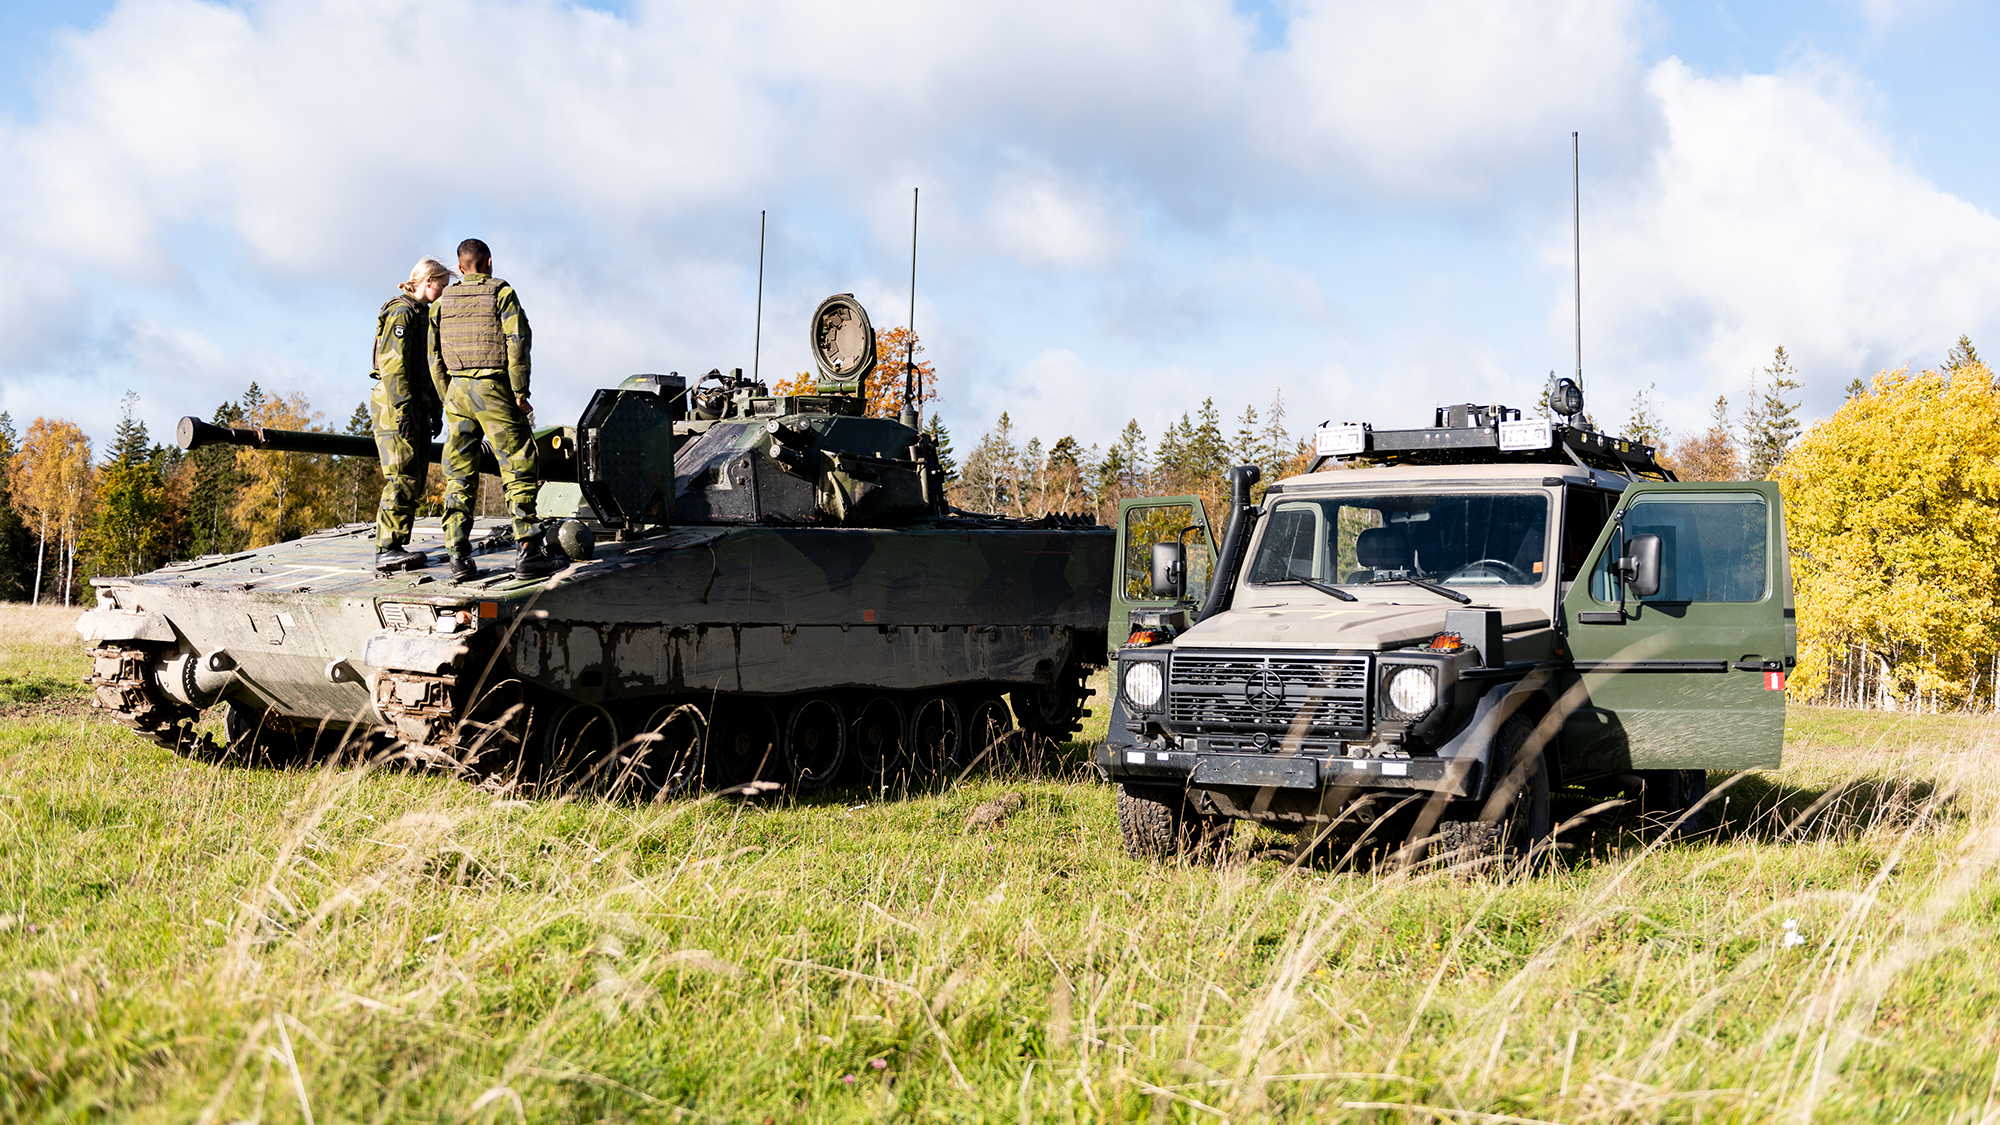 During the fall of 2022, FMV led a test week in Skövde where personnel from FMV and the Swedish Armed Forces tried out the new system configurations.